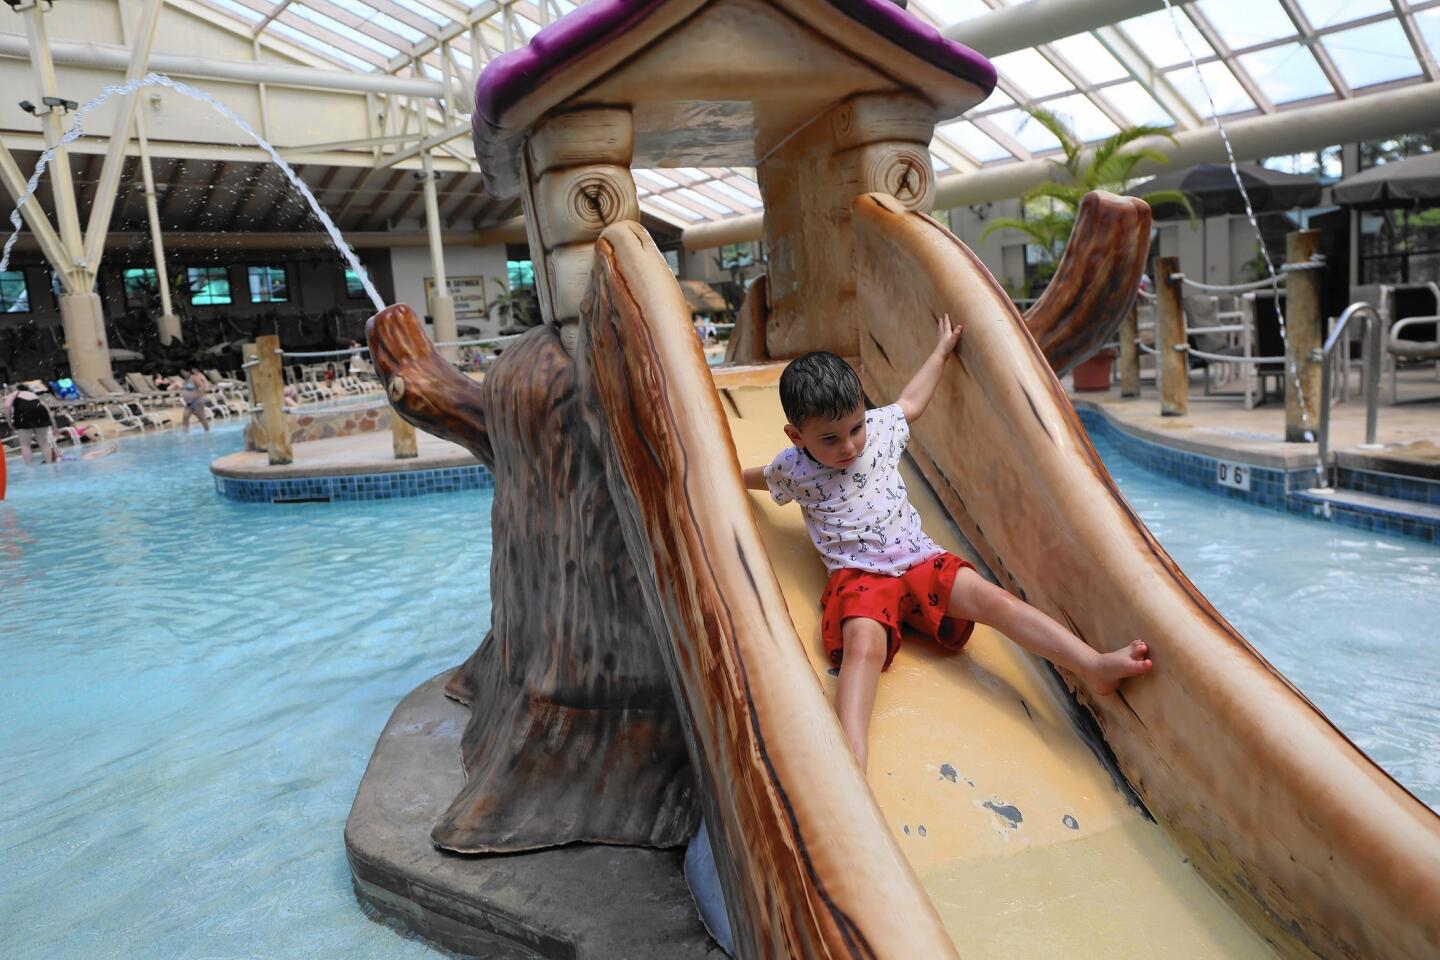 Aaron Brletic, 2, of Appleton, Wis., cautiously goes down a slide in the Wild WaterDome at Wilderness Resort.